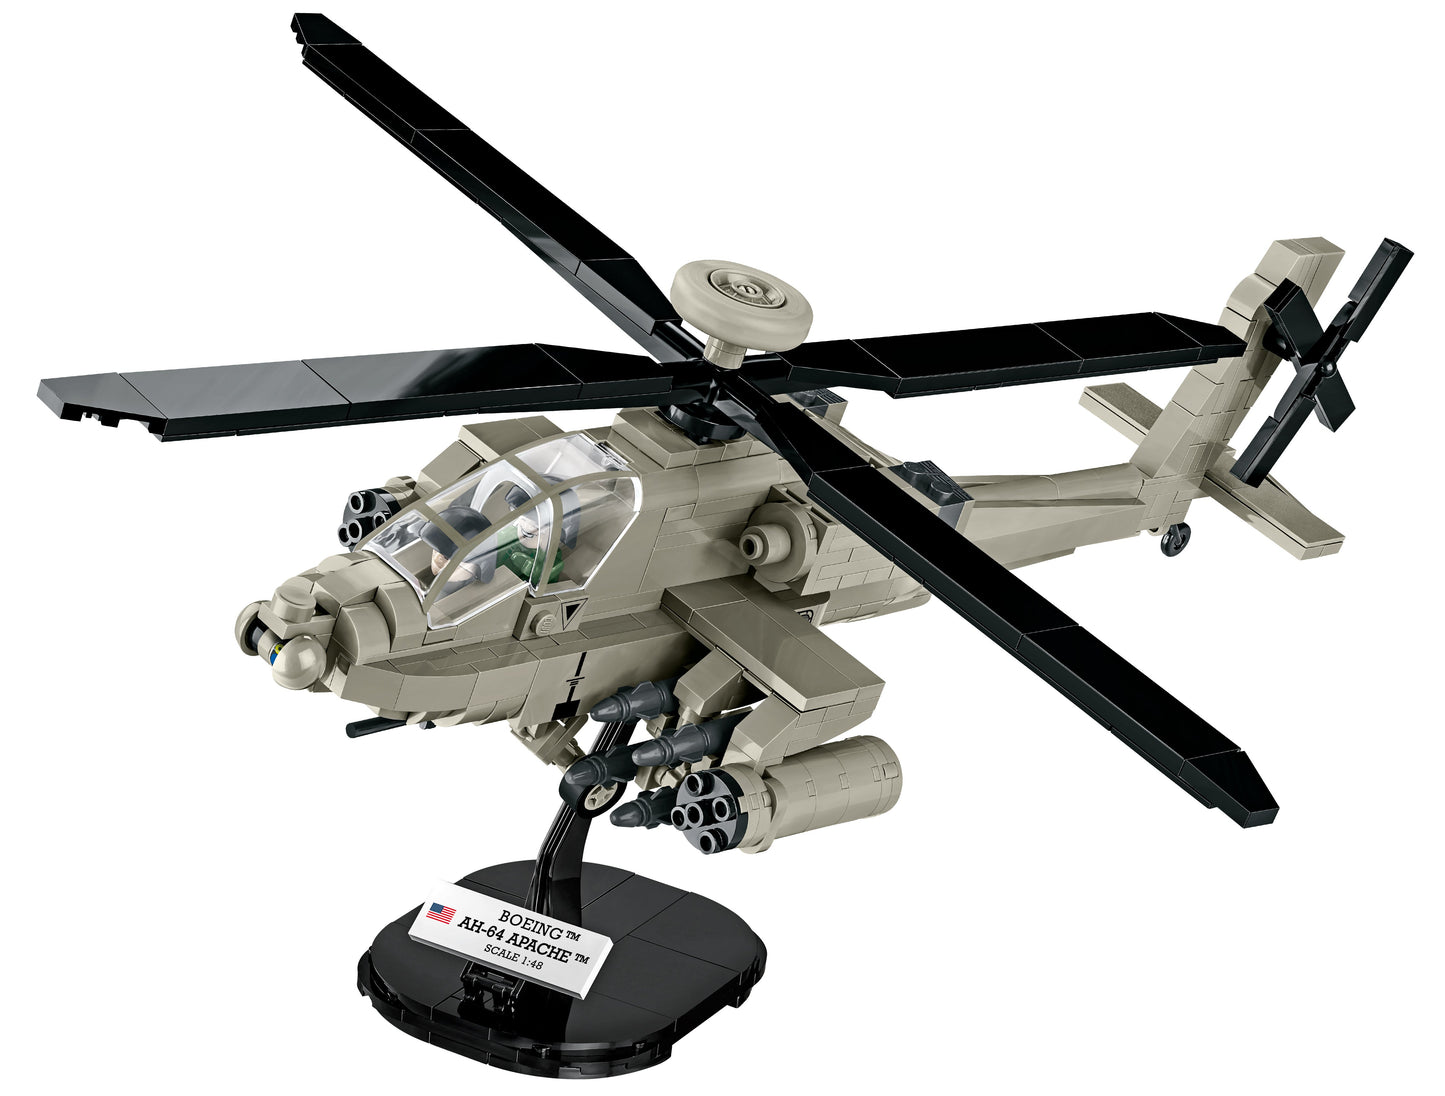 COBI Armed Forces AH-64 Apache Helicopter